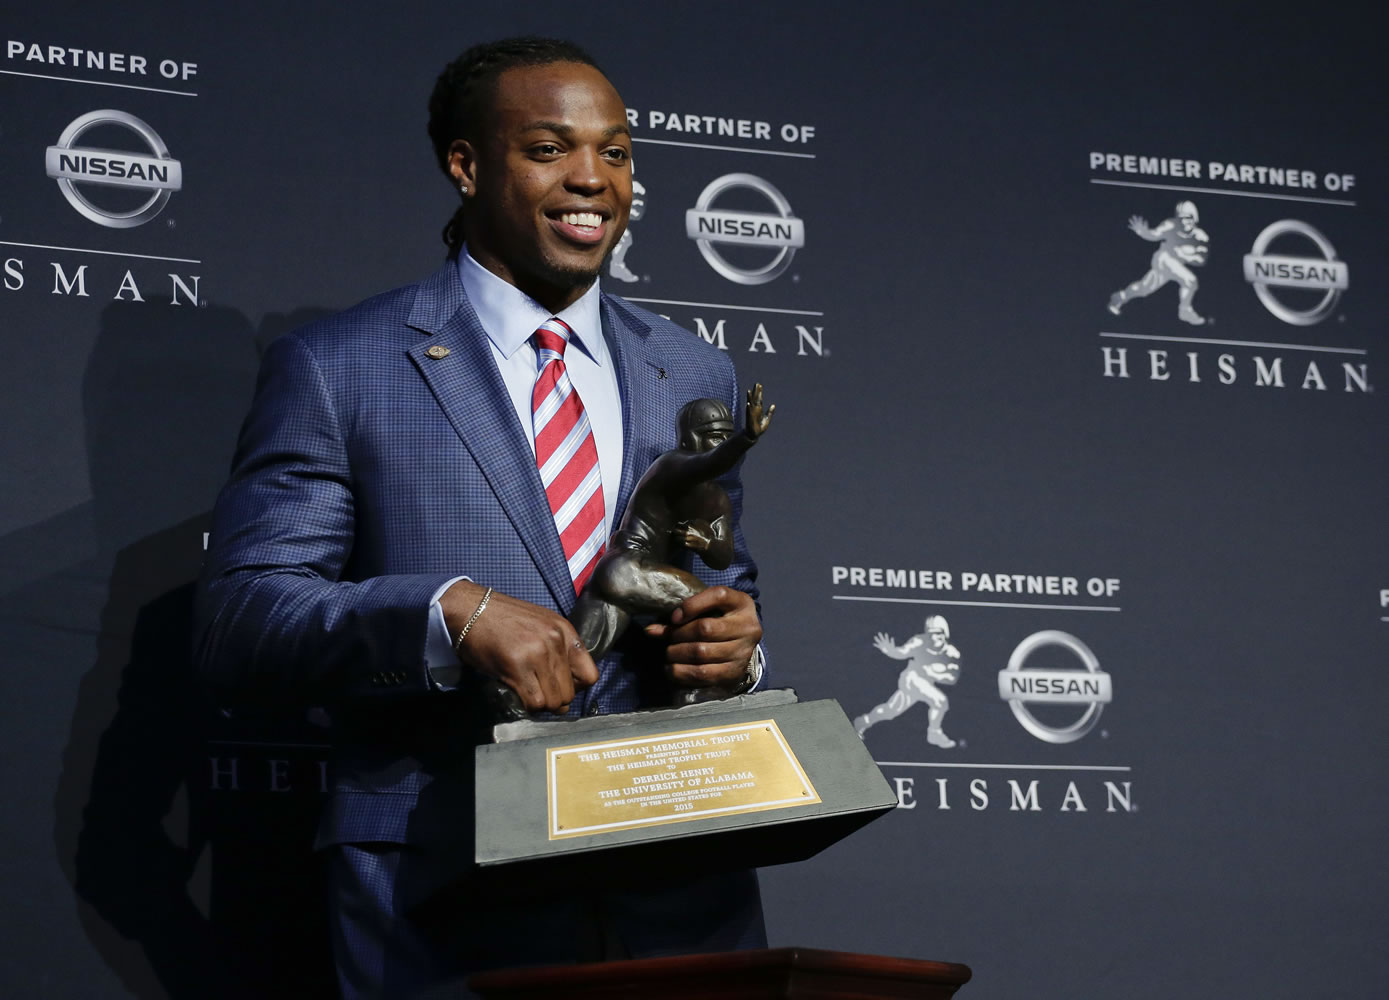 Alabama's Derrick Henry poses for photos after winning the Heisman Trophy, Saturday, Dec. 12, 2015, in New York.